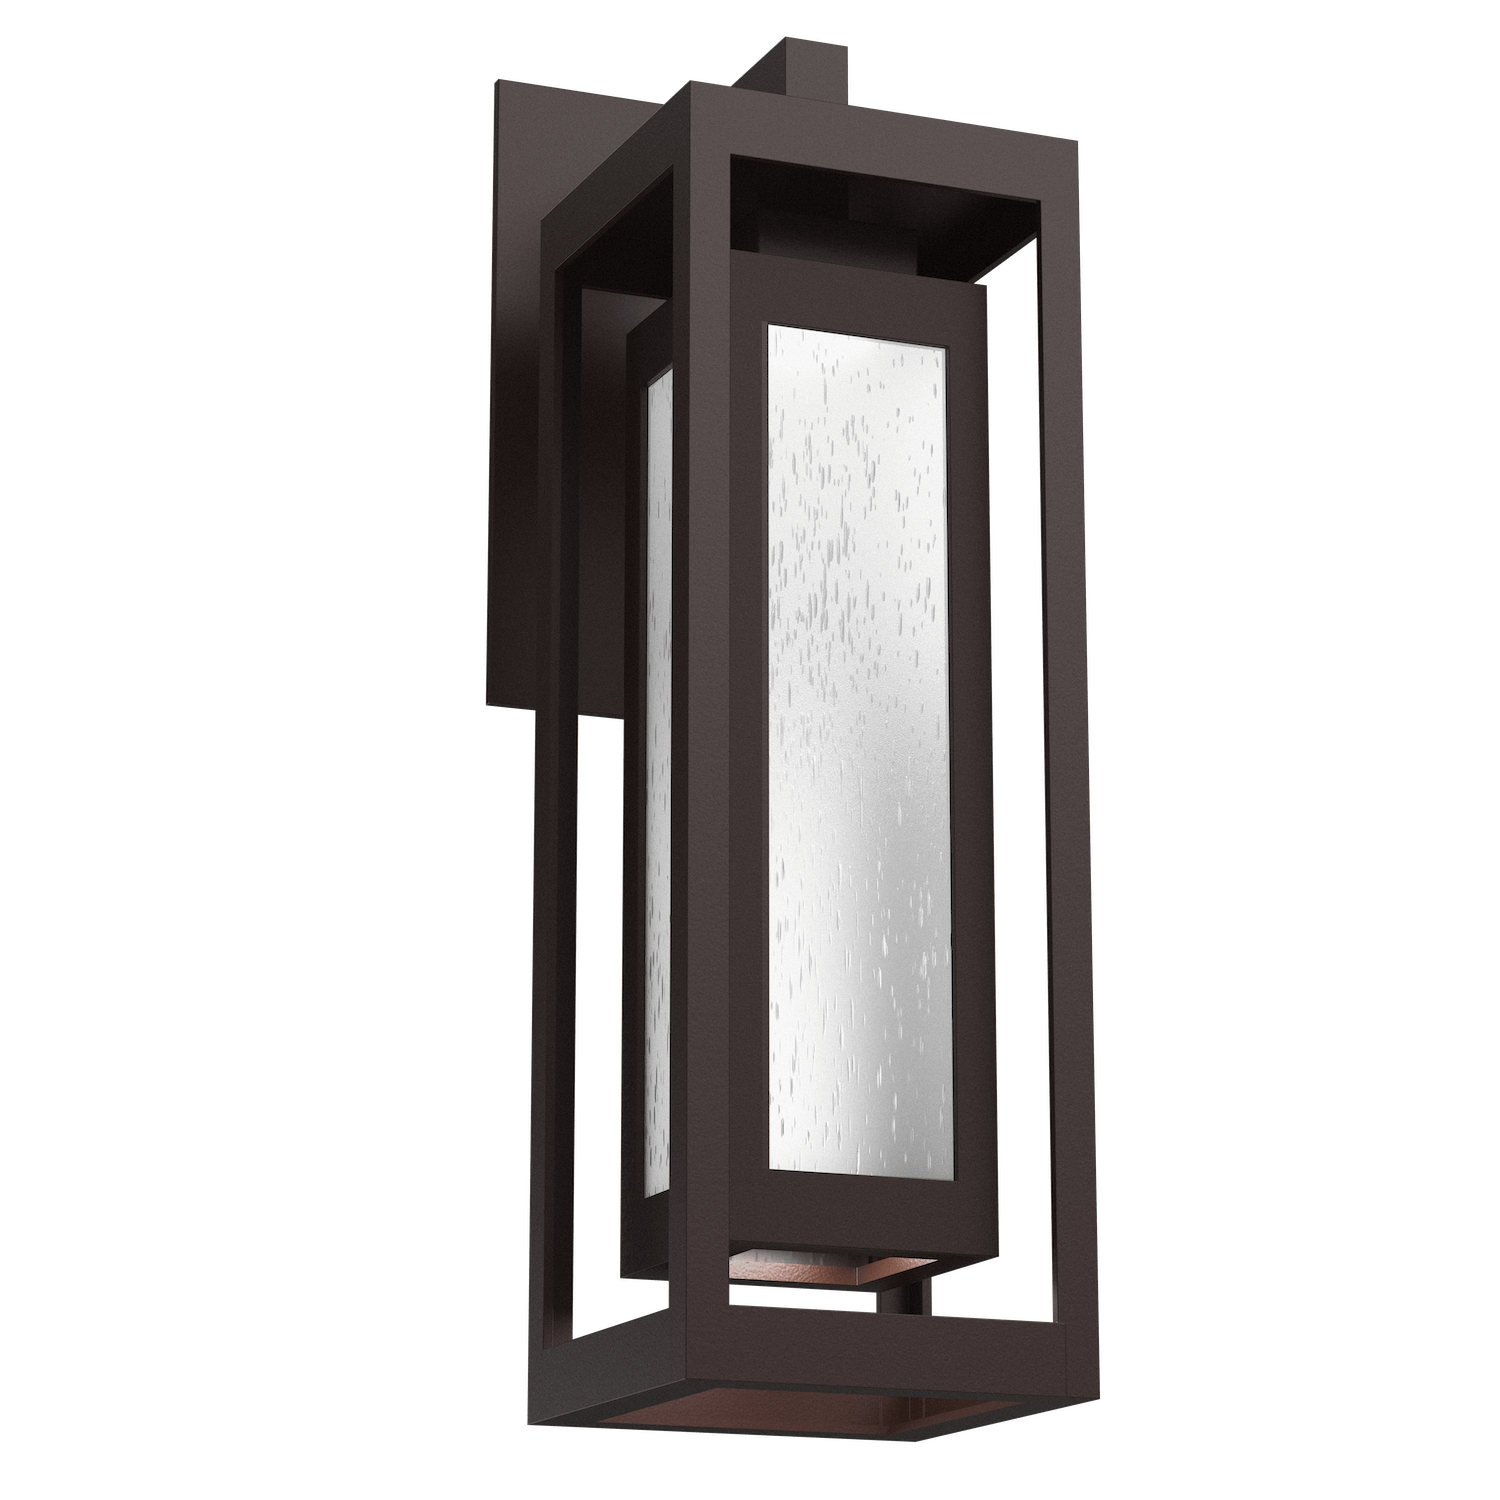 ODB0027-20-SB-F-Hammerton-Studio-Double-Box-21-inch-outdoor-sconce-with-statuary-bronze-finish-and-frosted-glass-shade-and-LED-lamping